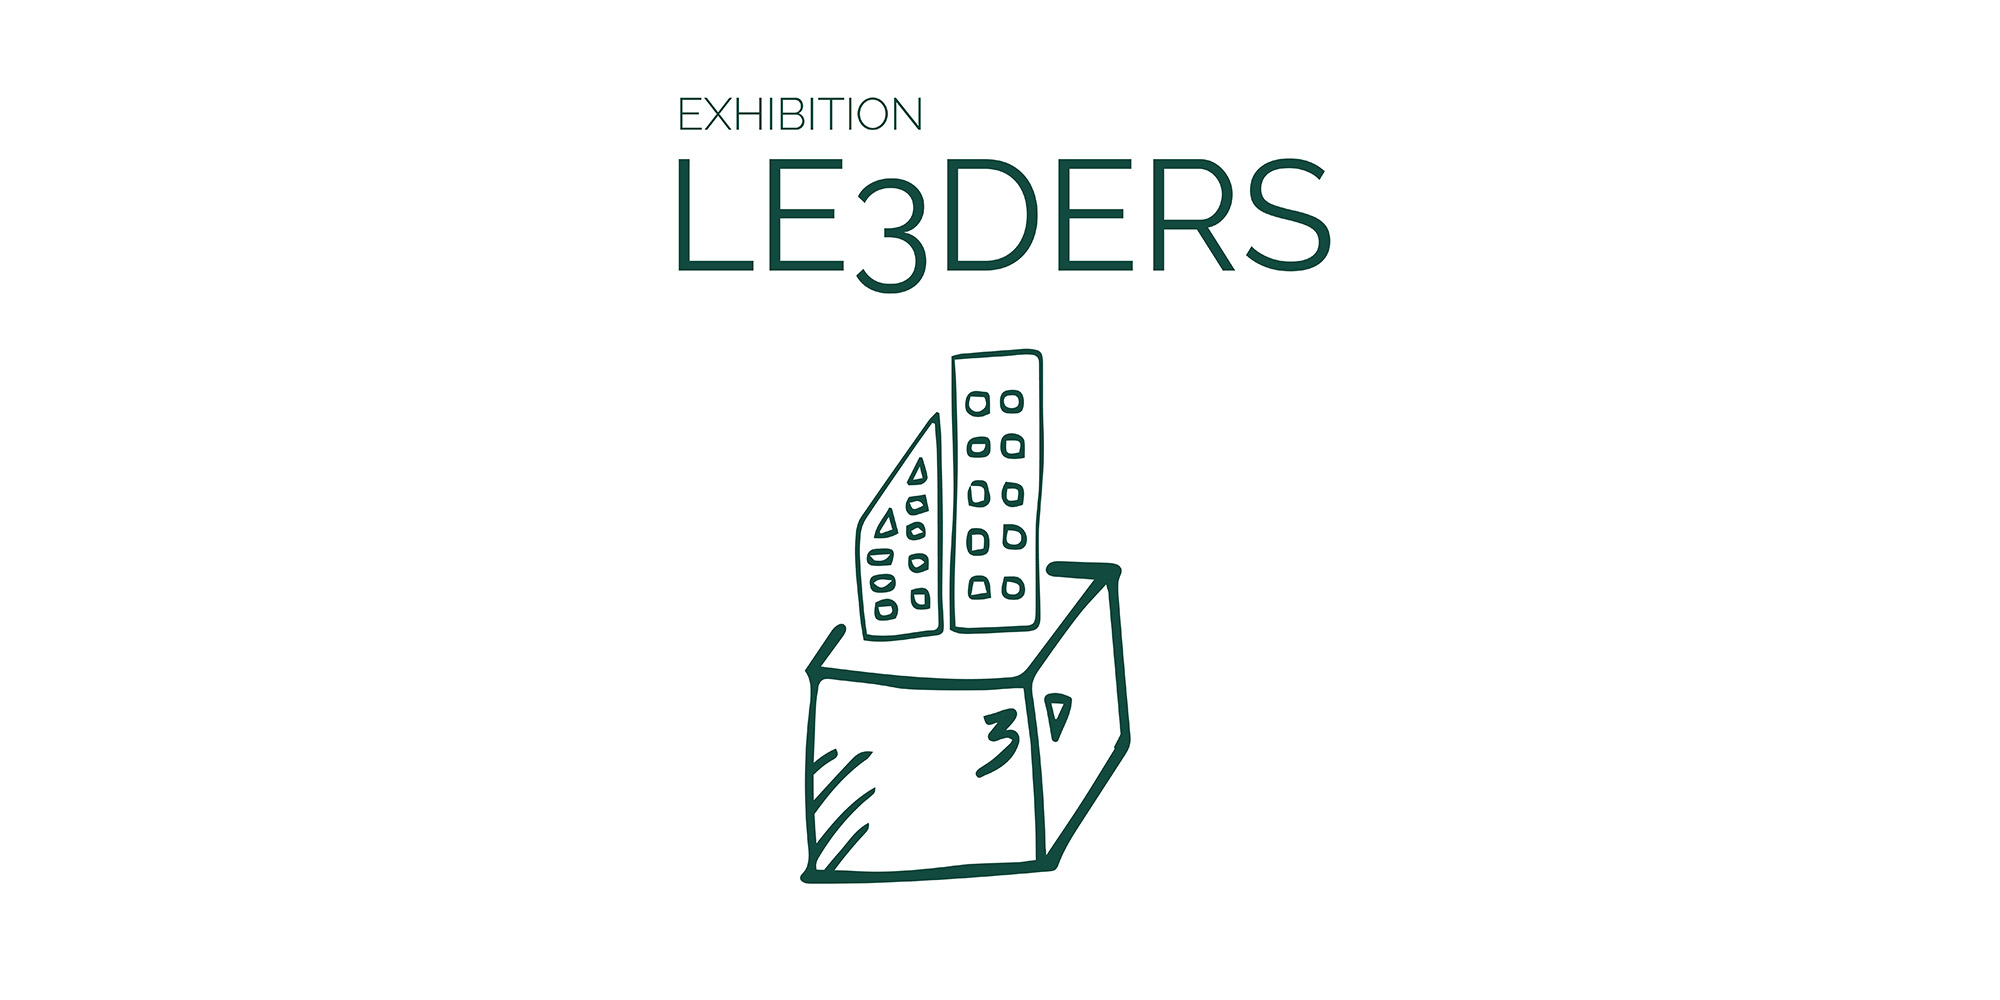 LE3DERS exhibition: sustainable architecture Augmented Reality exhibition at Fuorisalone 2022